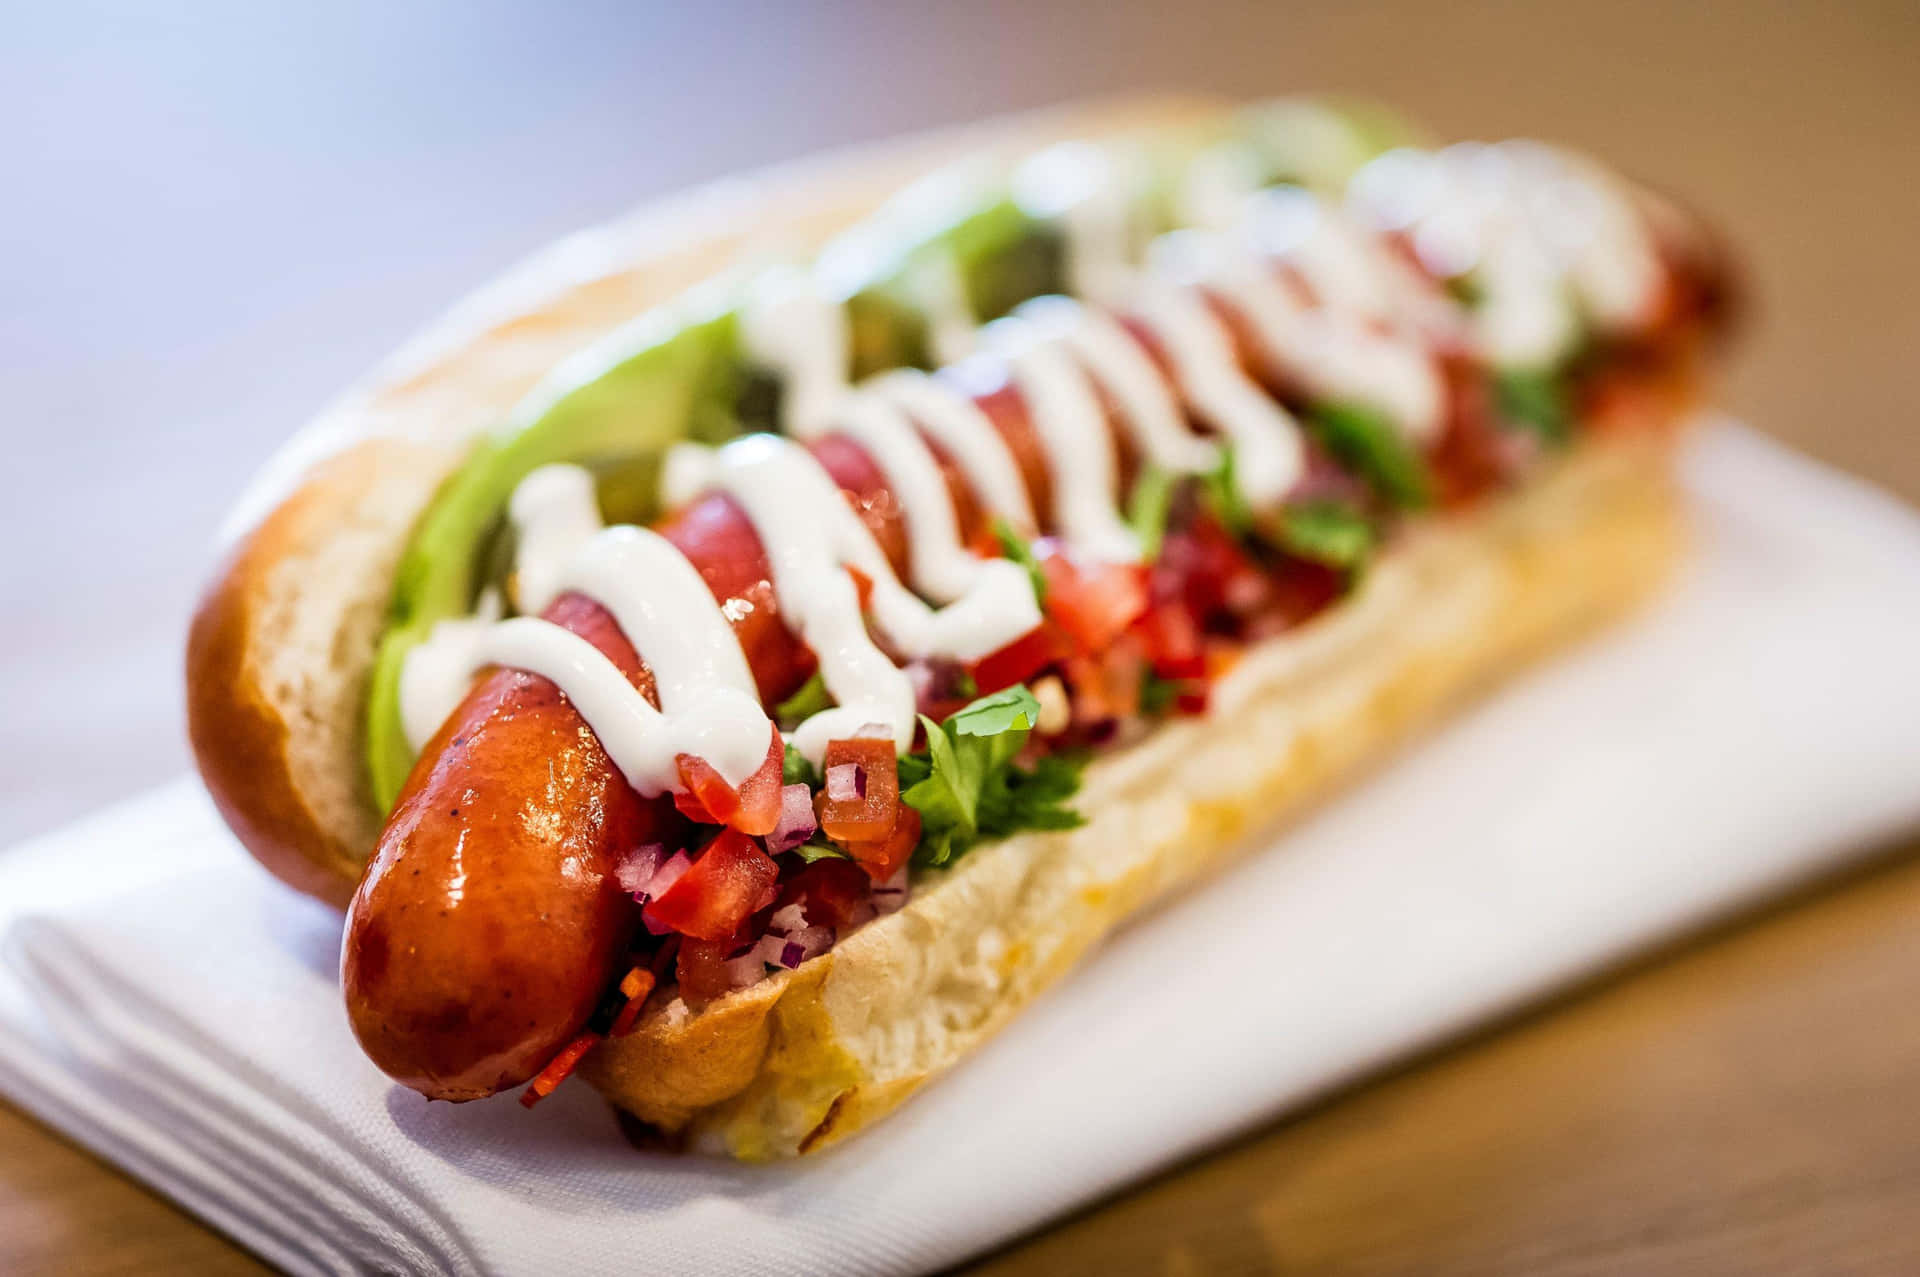 Delightful Gourmet Hot Dog With Fresh Toppings